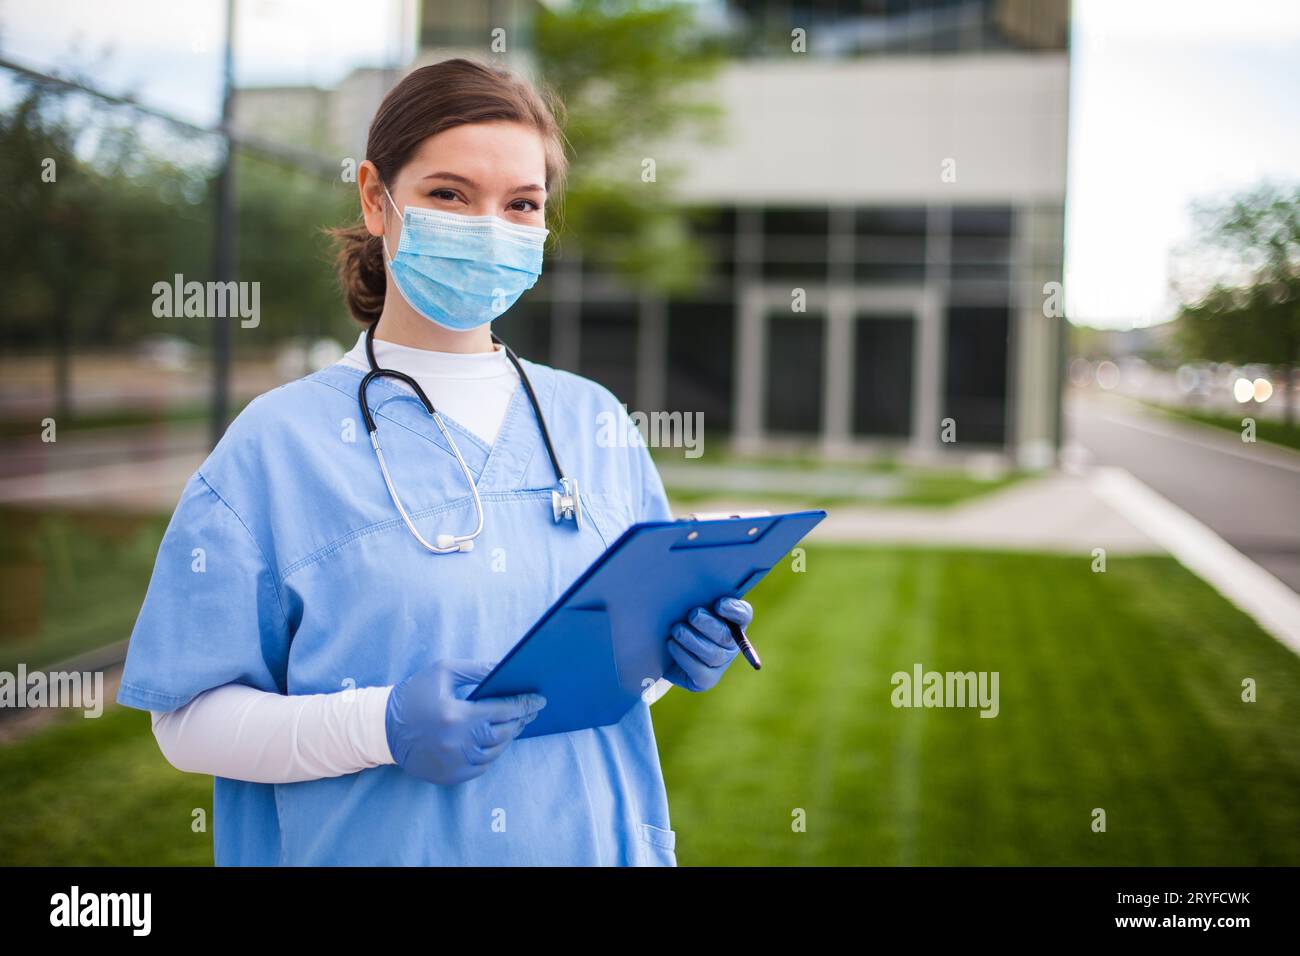 Modern female medical doctor standing on the lawn outside hospital facility Stock Photo